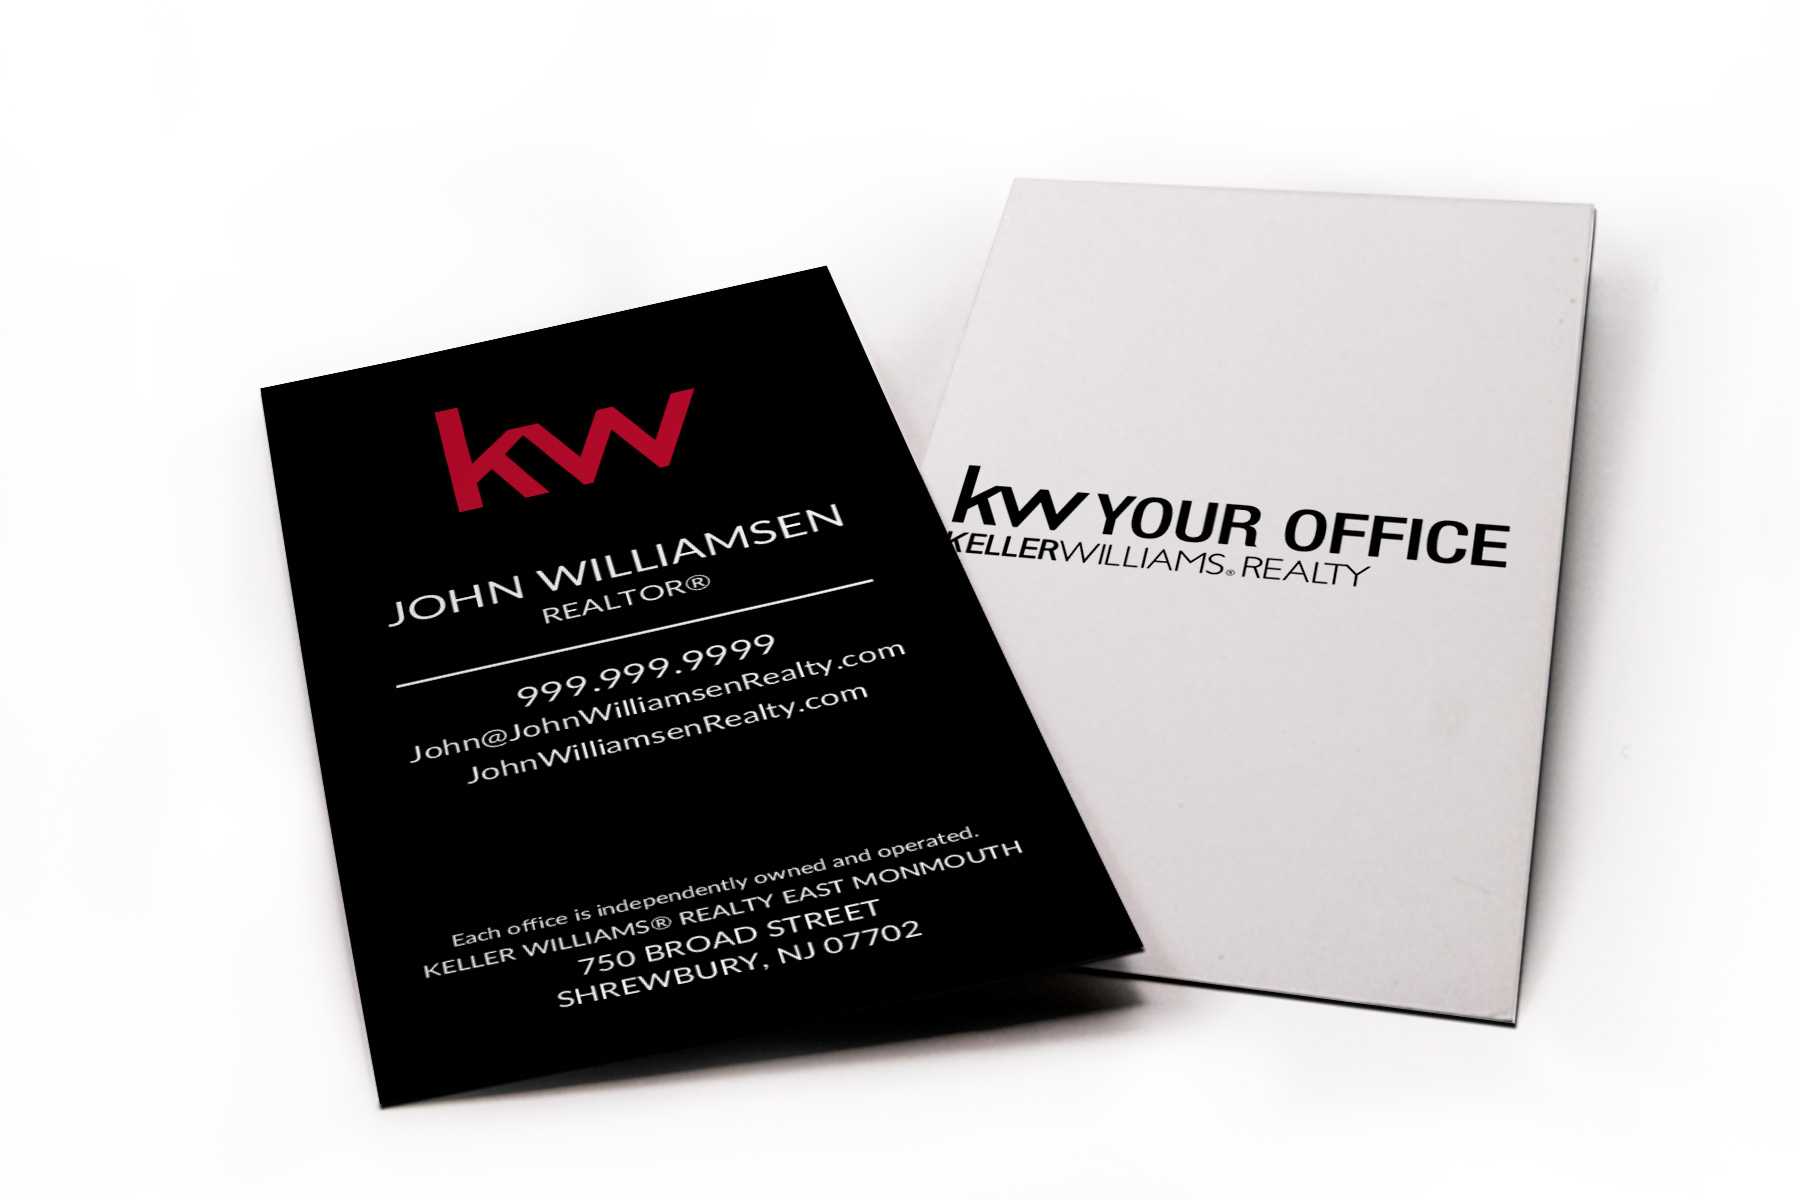 Vertical Black Kw Business Card In Keller Williams Business Card Templates